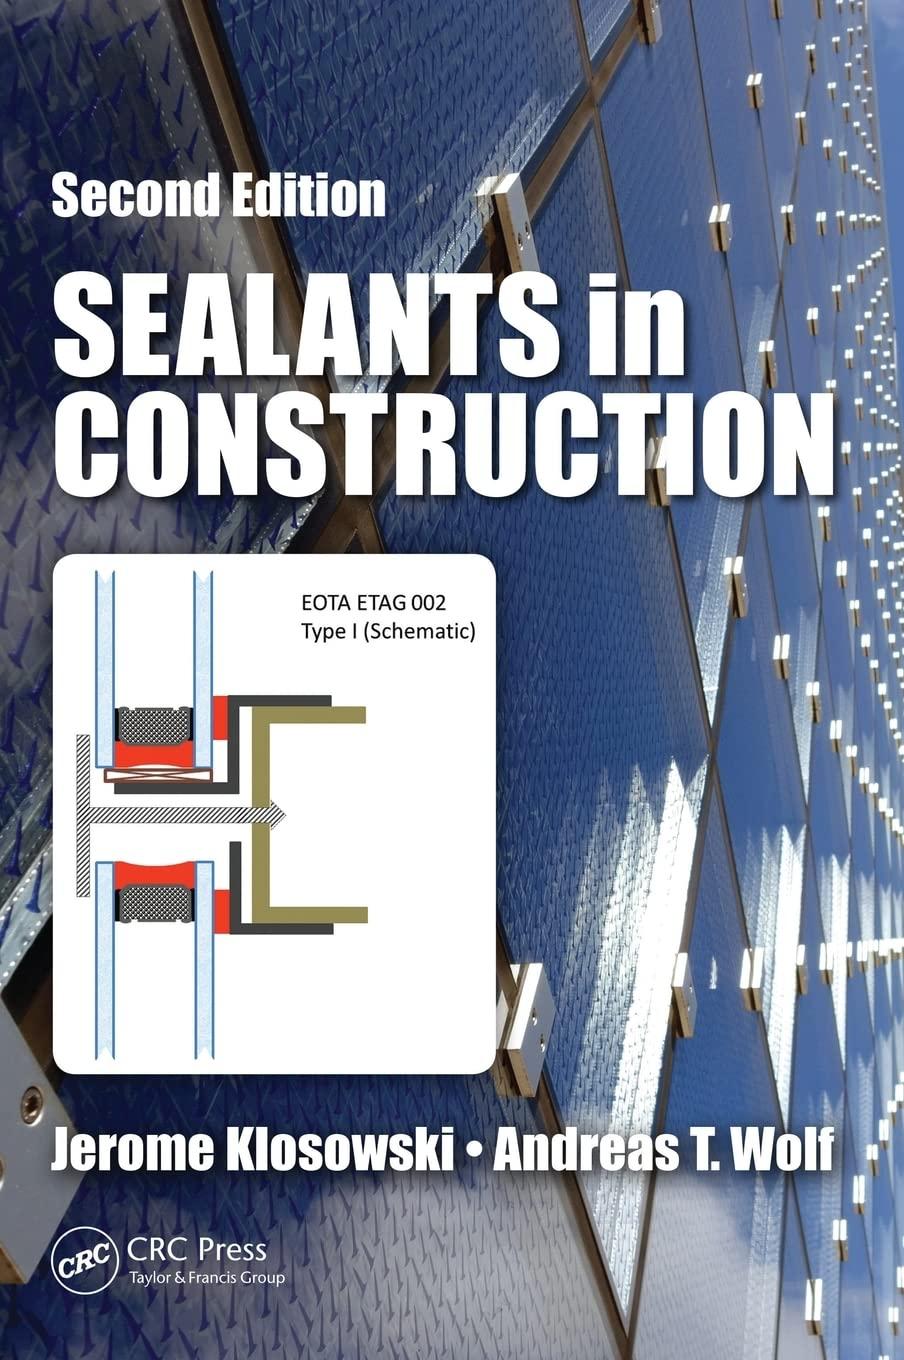 sealants in construction 2nd edition jerome klosowski, andreas t. wolf 1574447173, 978-1574447170